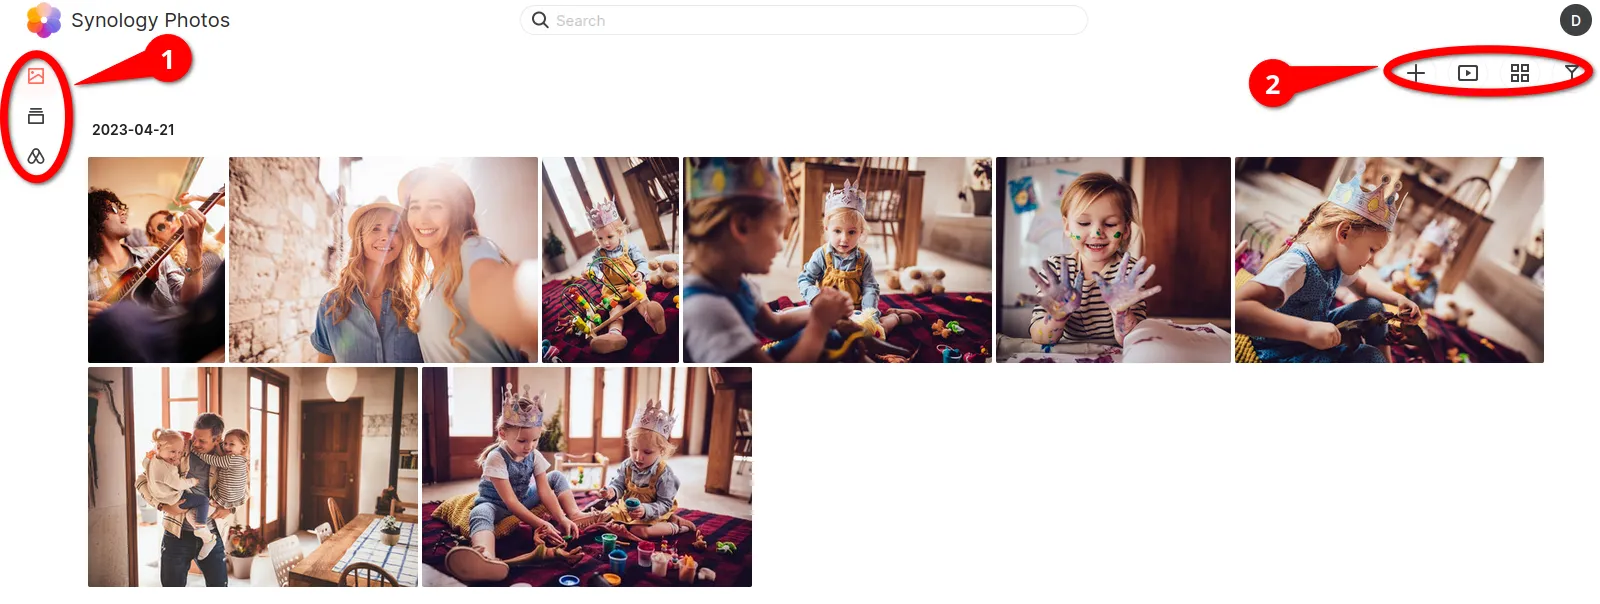 Key Features of Synology Photos Photo Storage Software